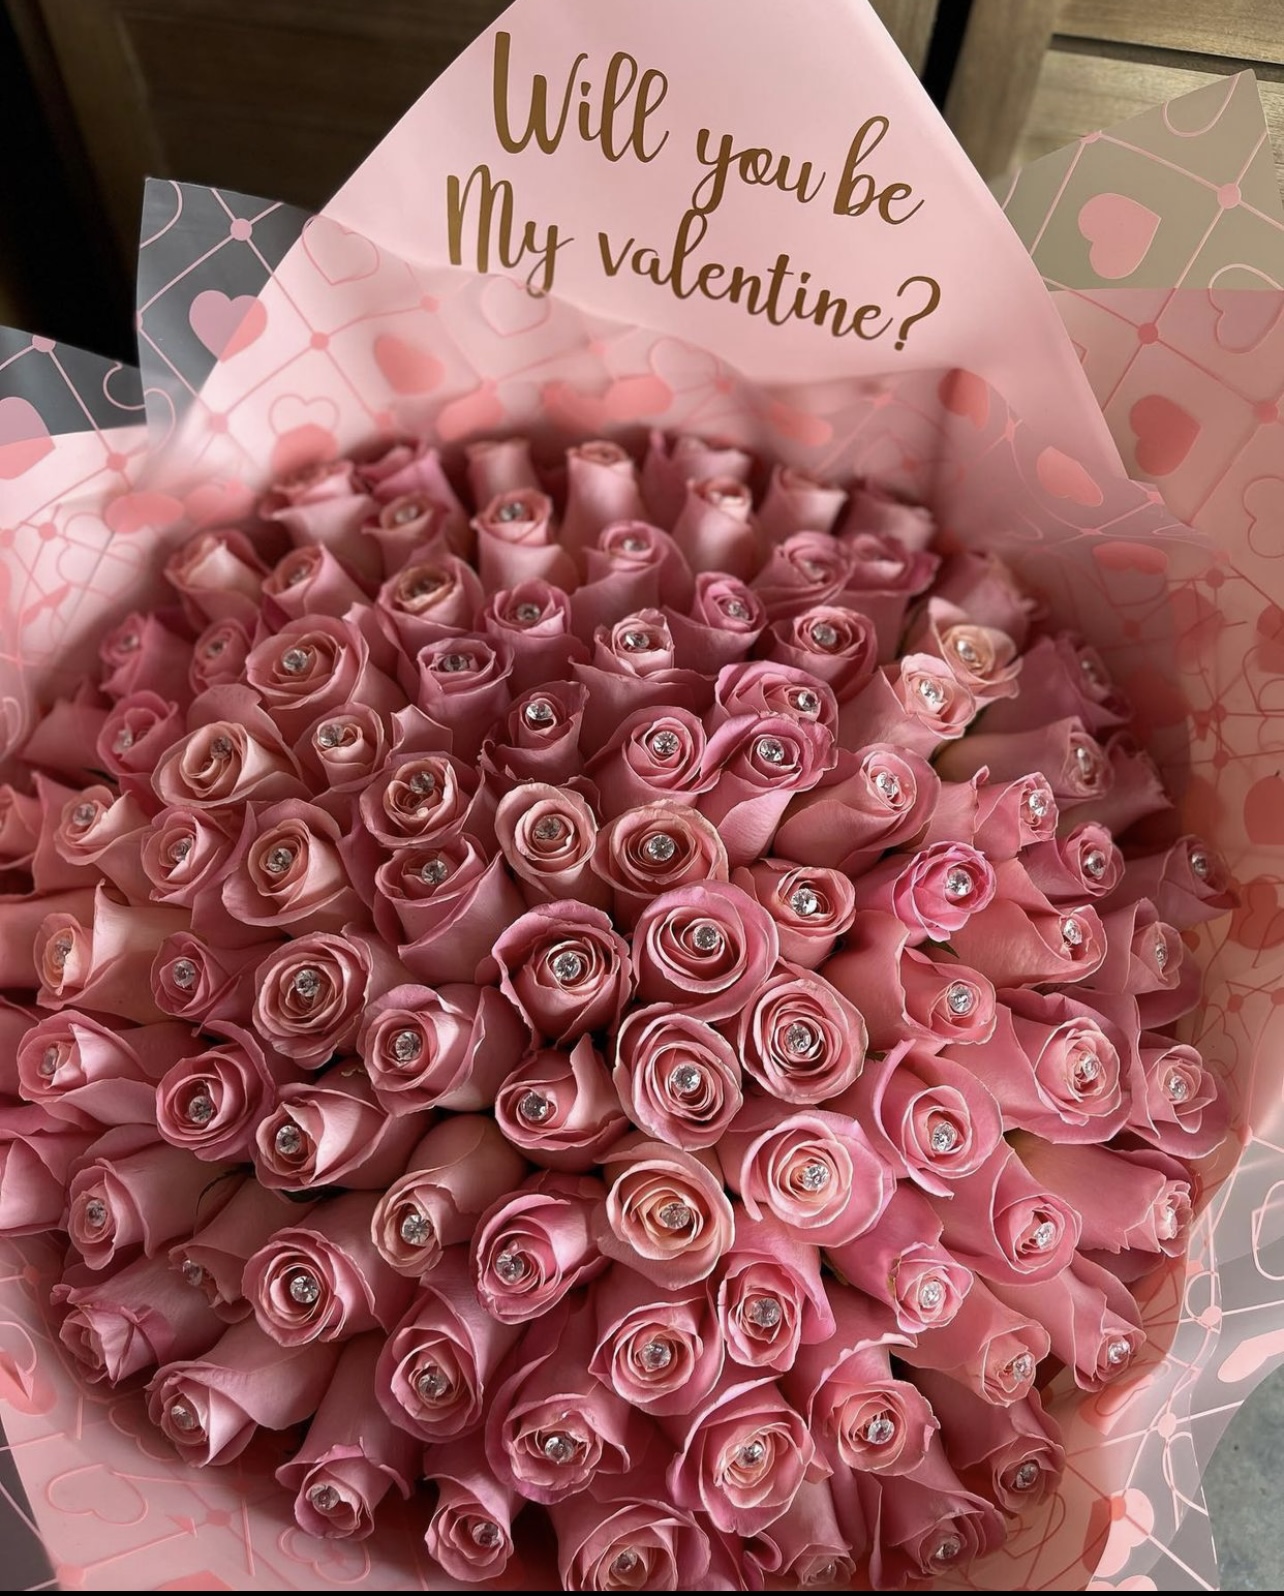 Will you be My Valentine?